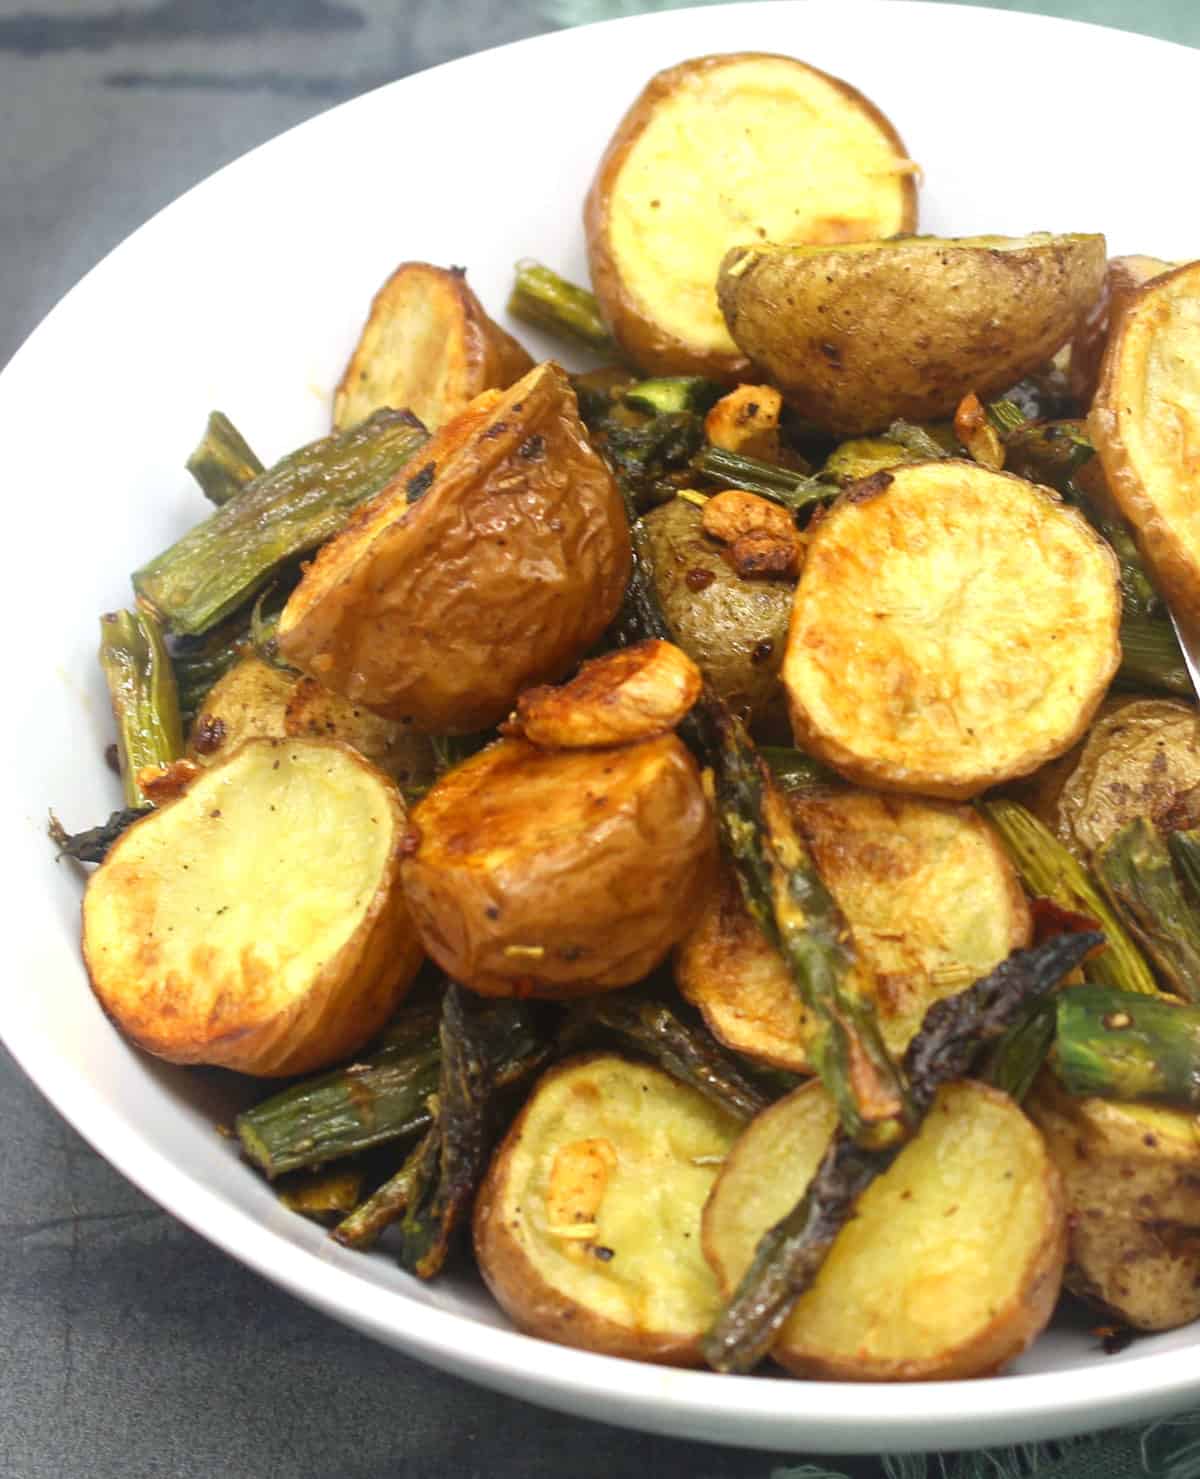 Sauteed asparagus and potatoes with garlic bits in a white pan.